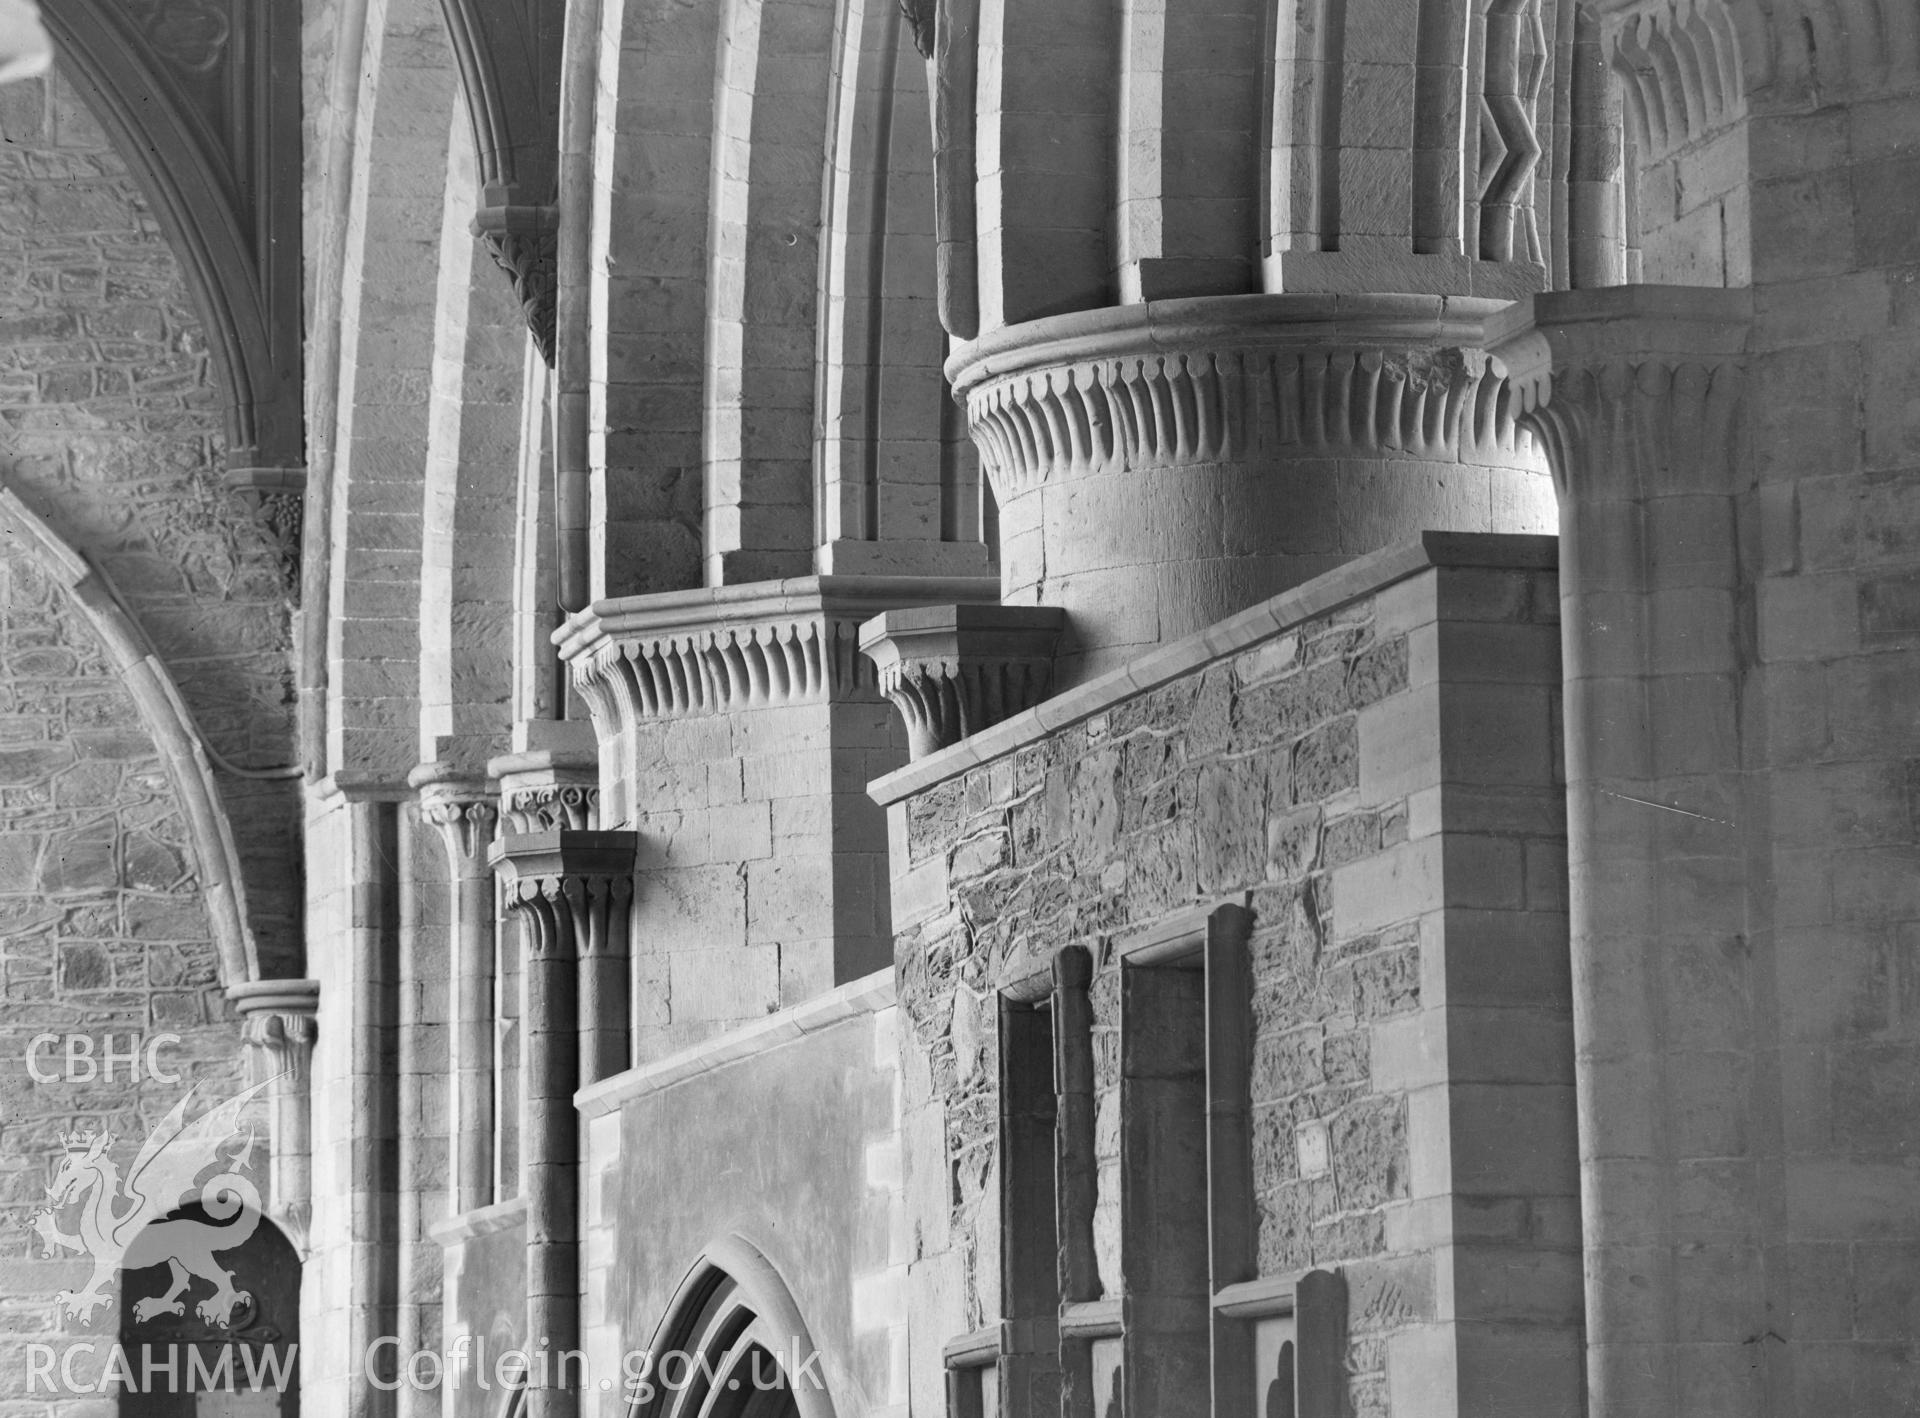 Digital copy of a black and white nitrate negative showing detailed view of the north aisle in presbytery at St. David's Cathedral, taken by E.W. Lovegrove, July 1936.